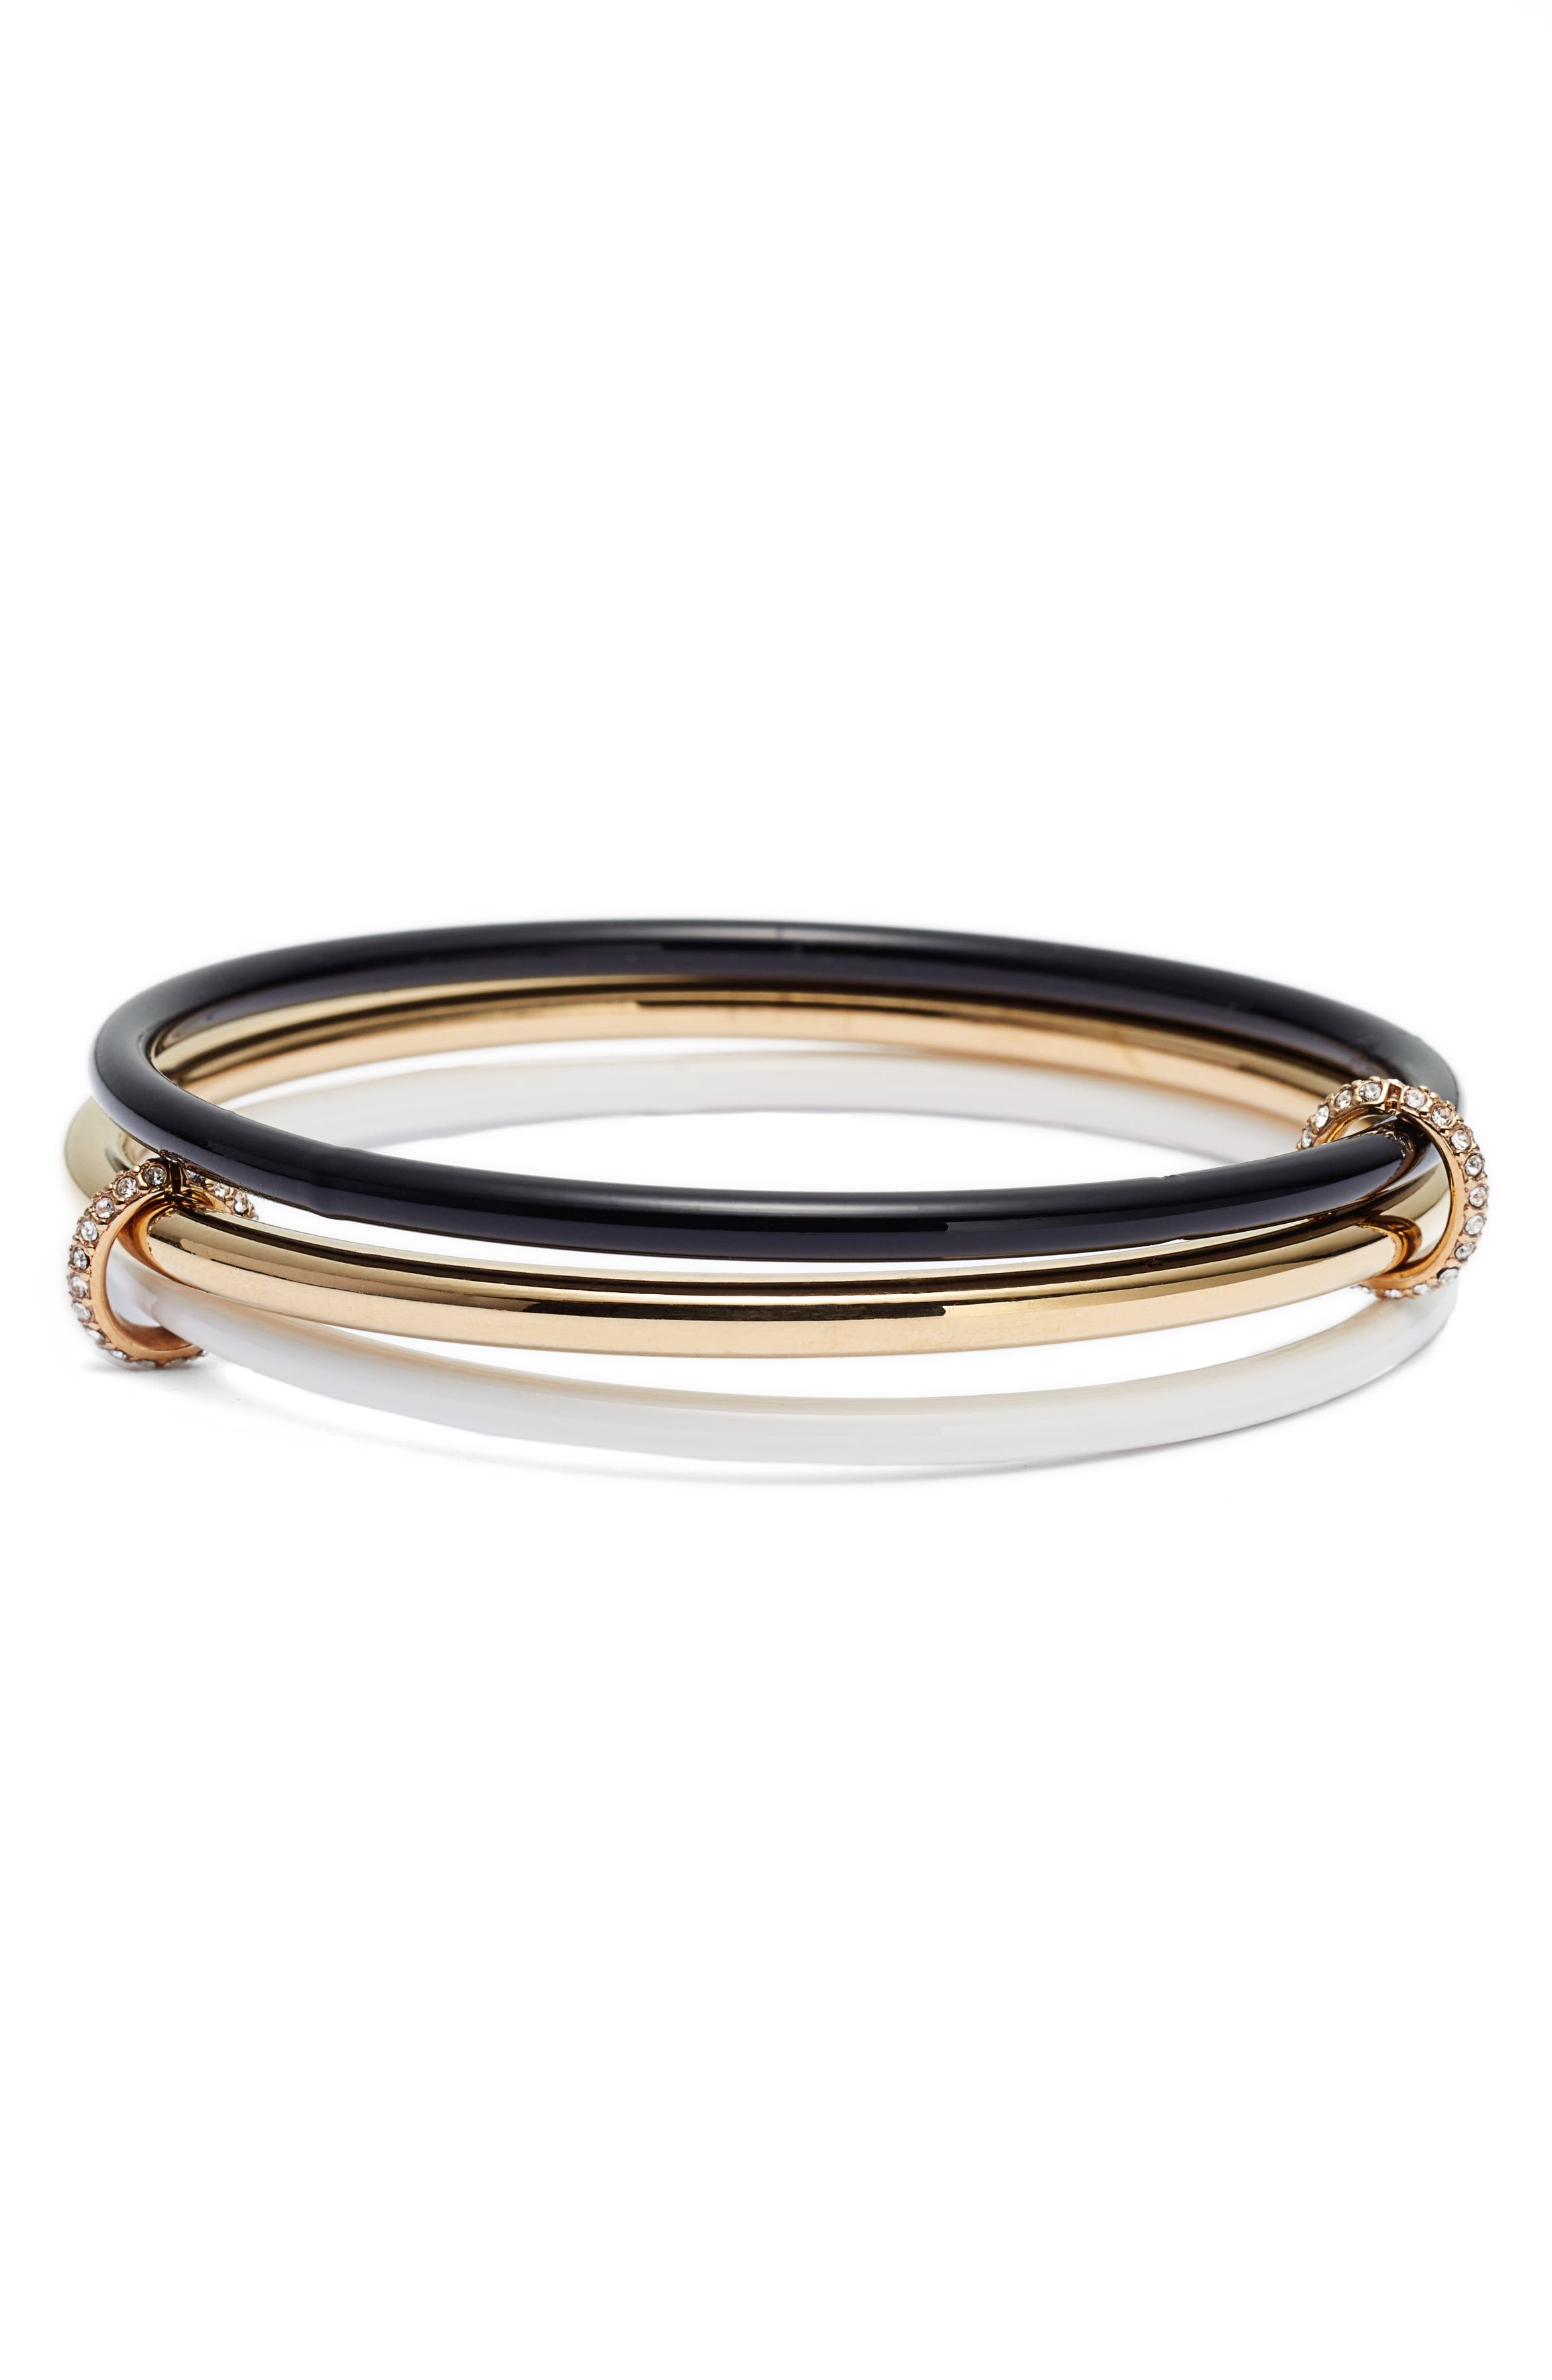 kate spade new york in a flash set of three bangles | Nordstrom